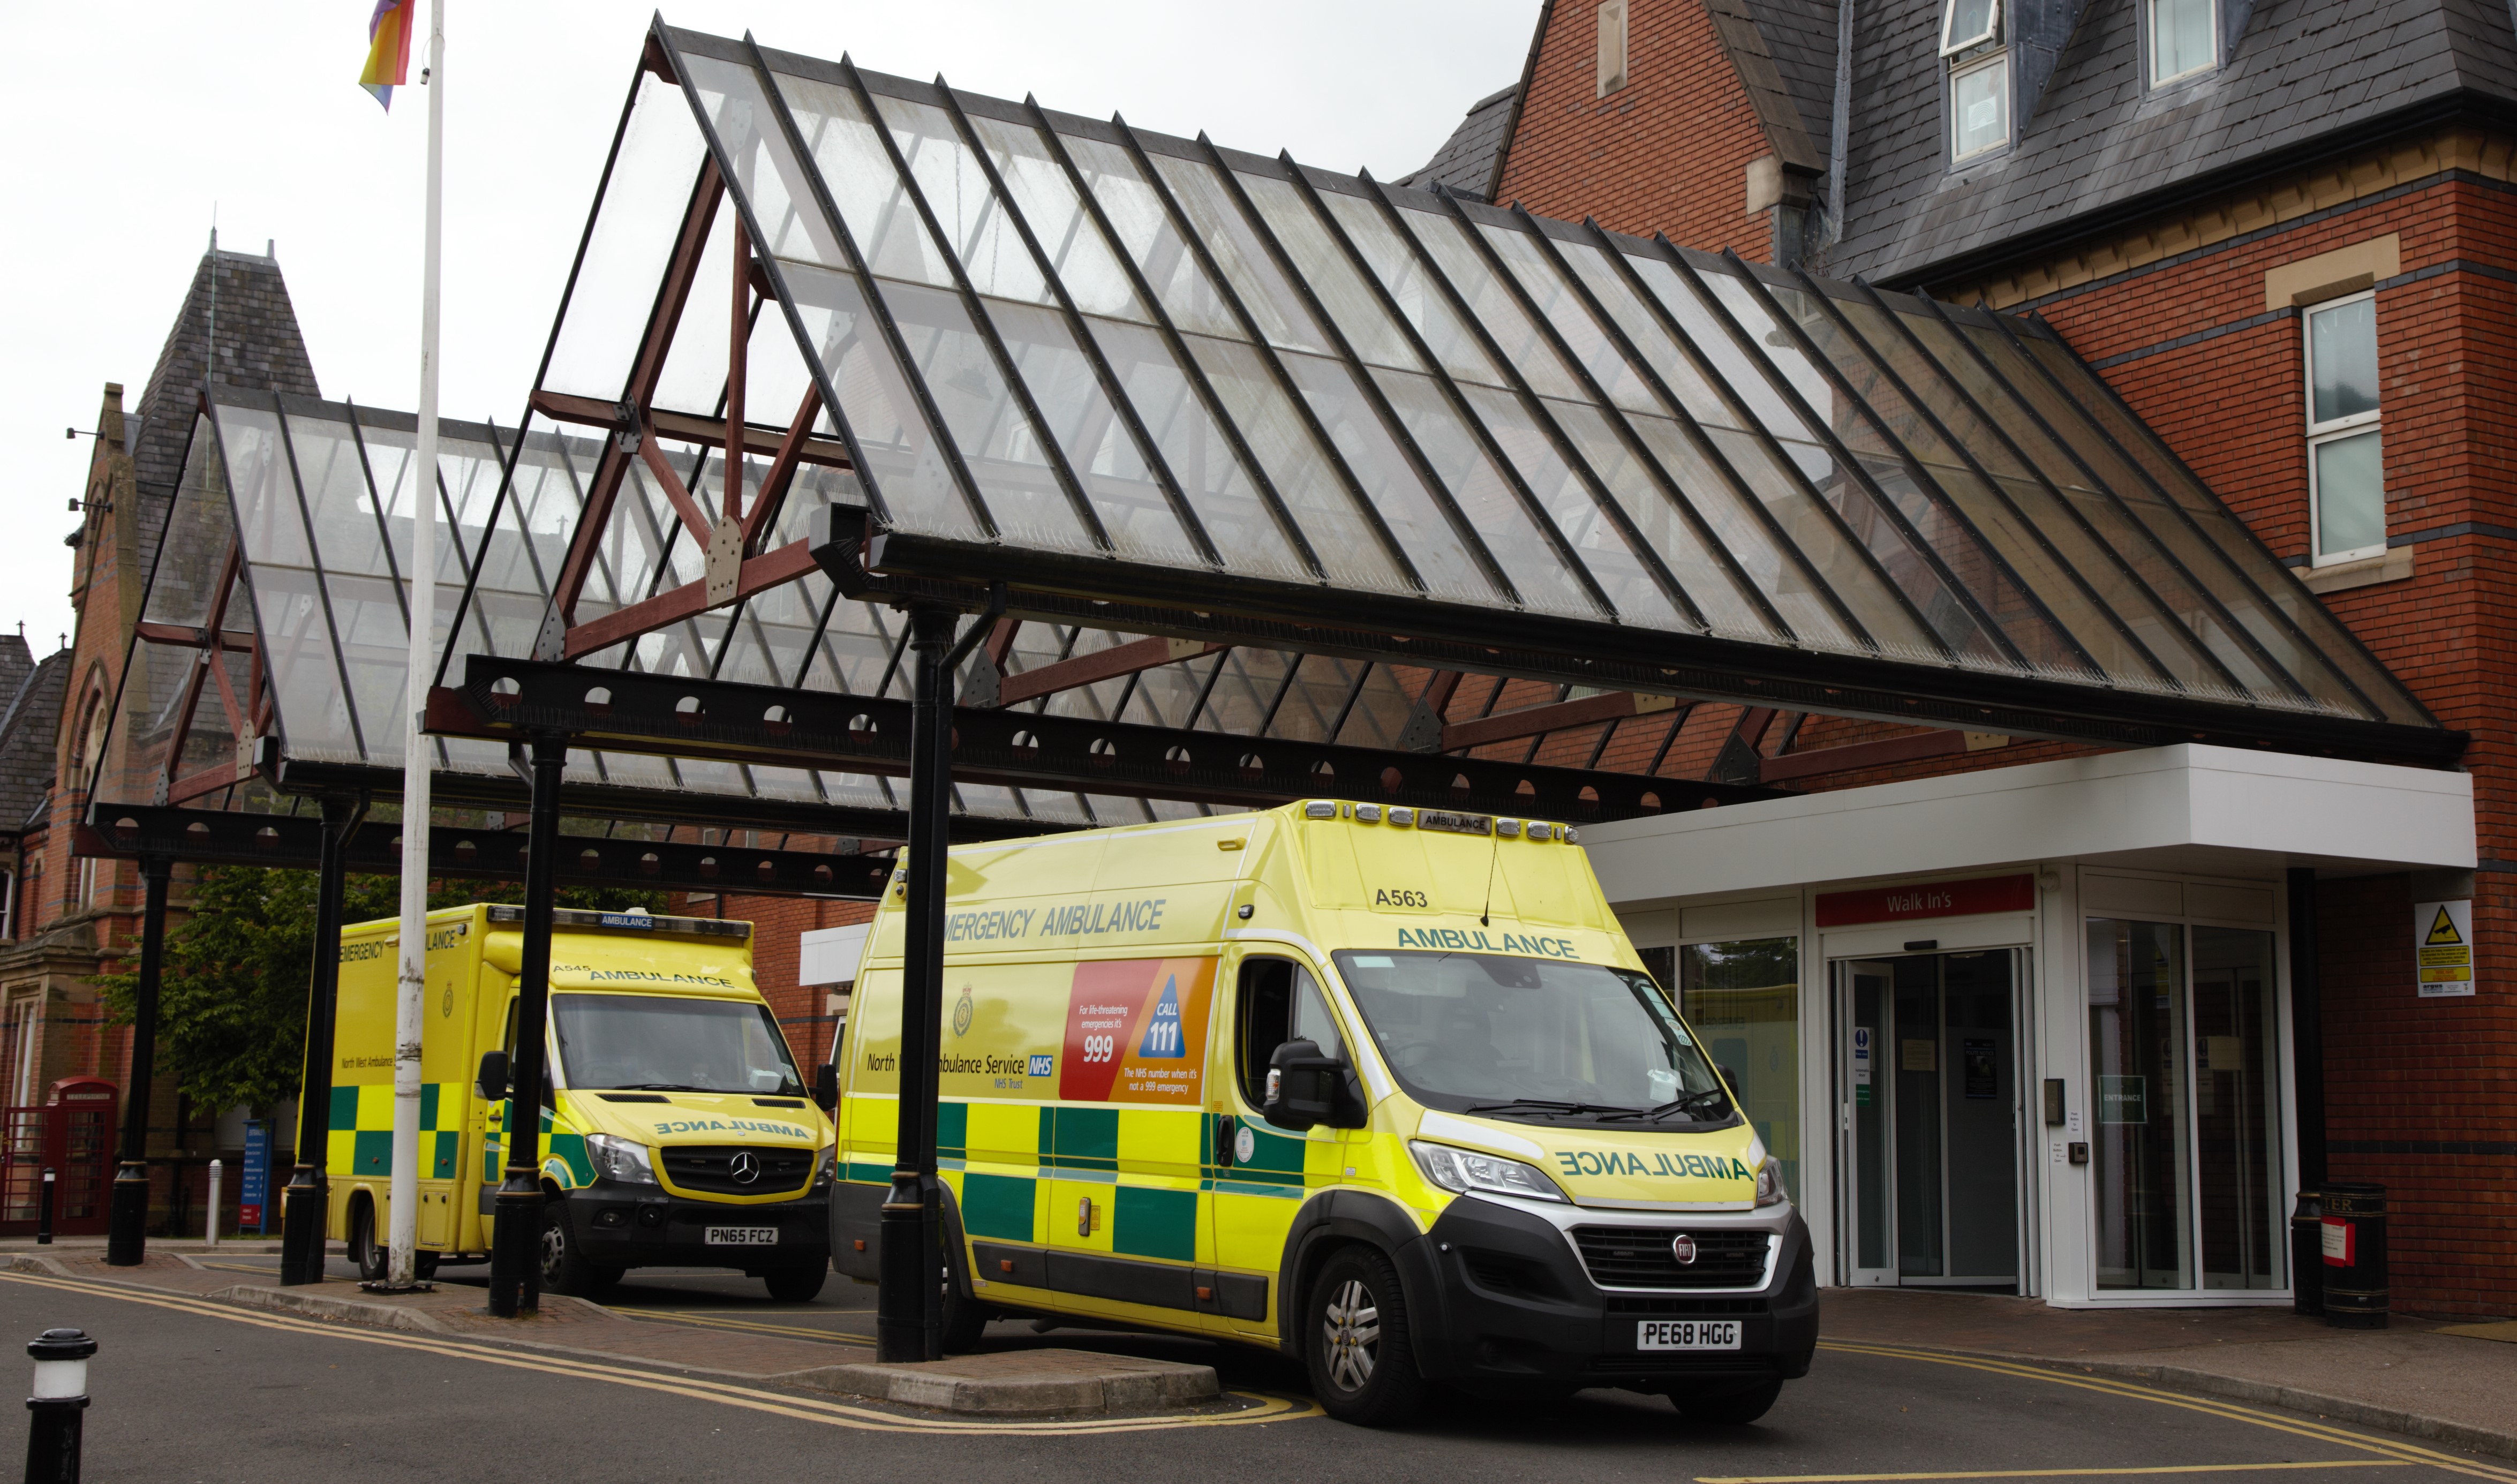 Ambulances parked outside of the Emergency Department at Royal Albert Edward Infirmary in Wigan